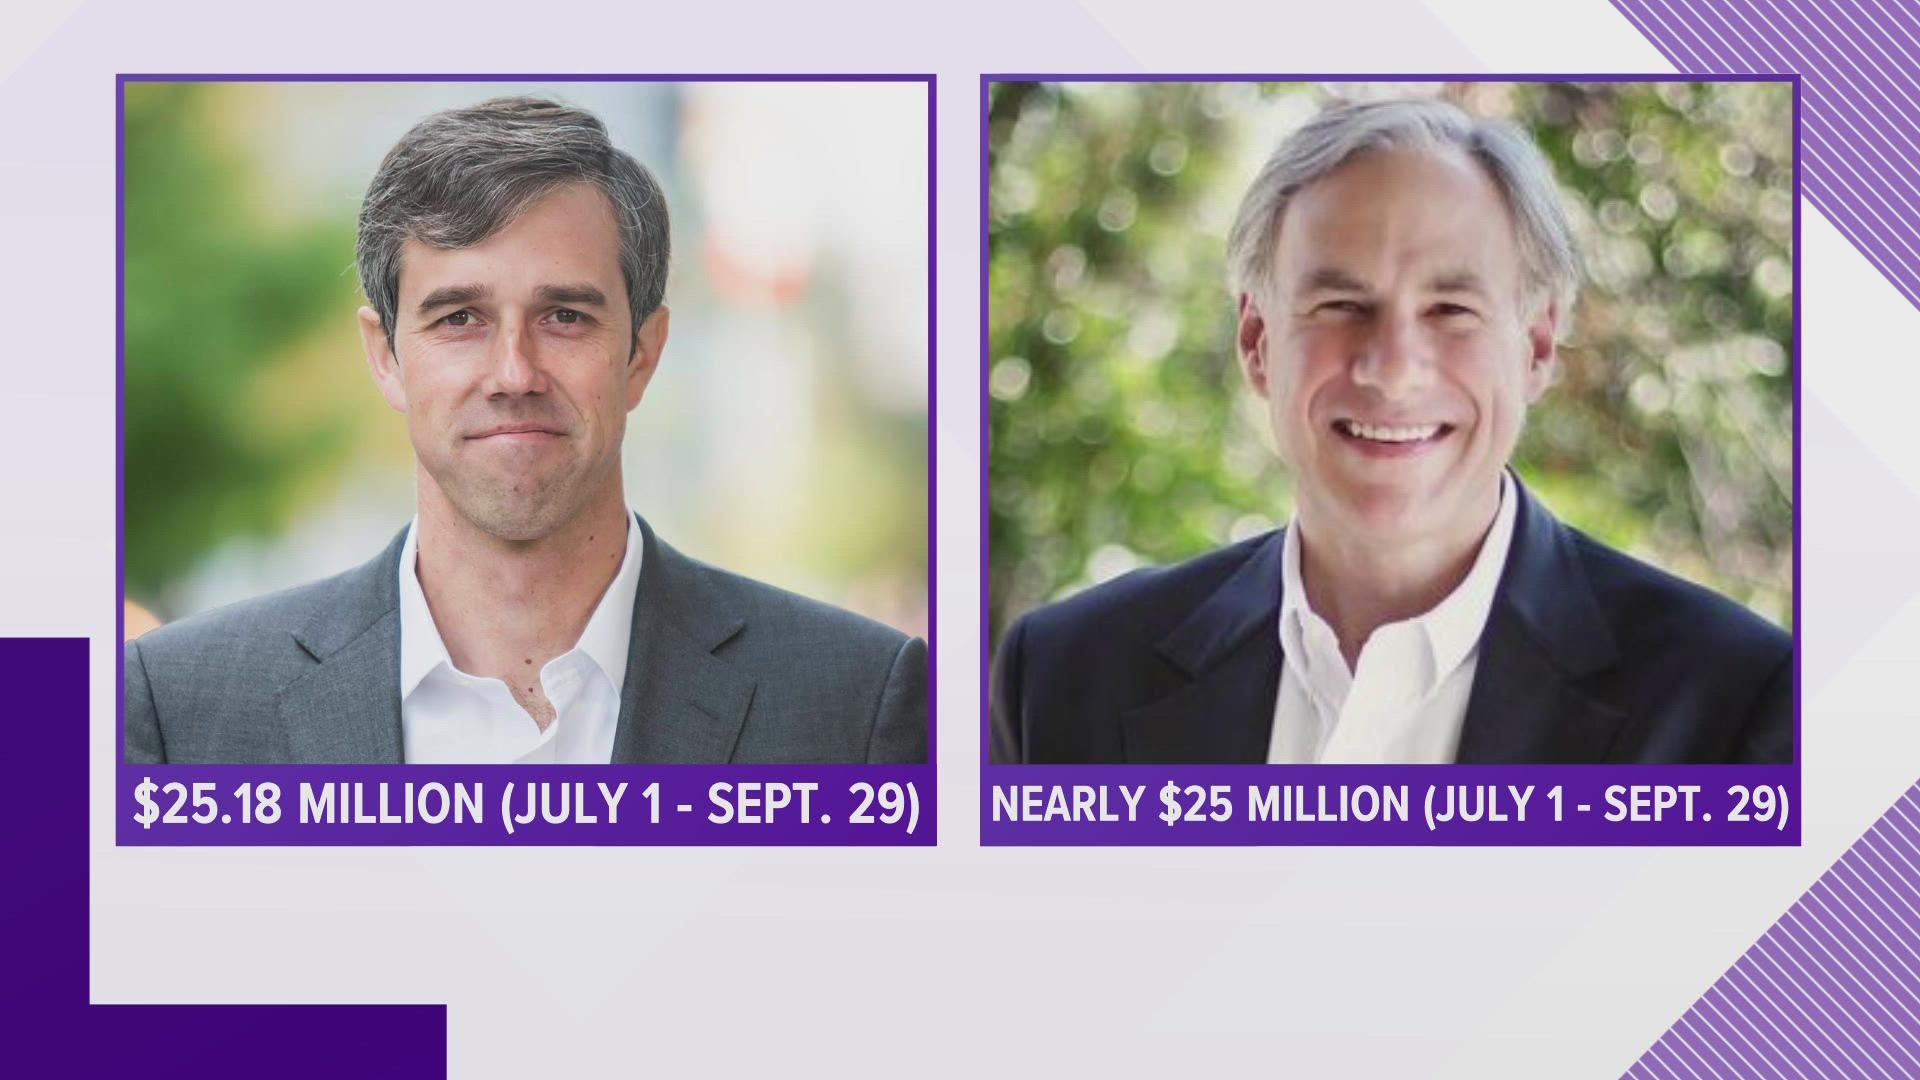 New campaign fundraising totals are in, and in the race for governor, Beto O'Rourke outraised Gov. Greg Abbott.